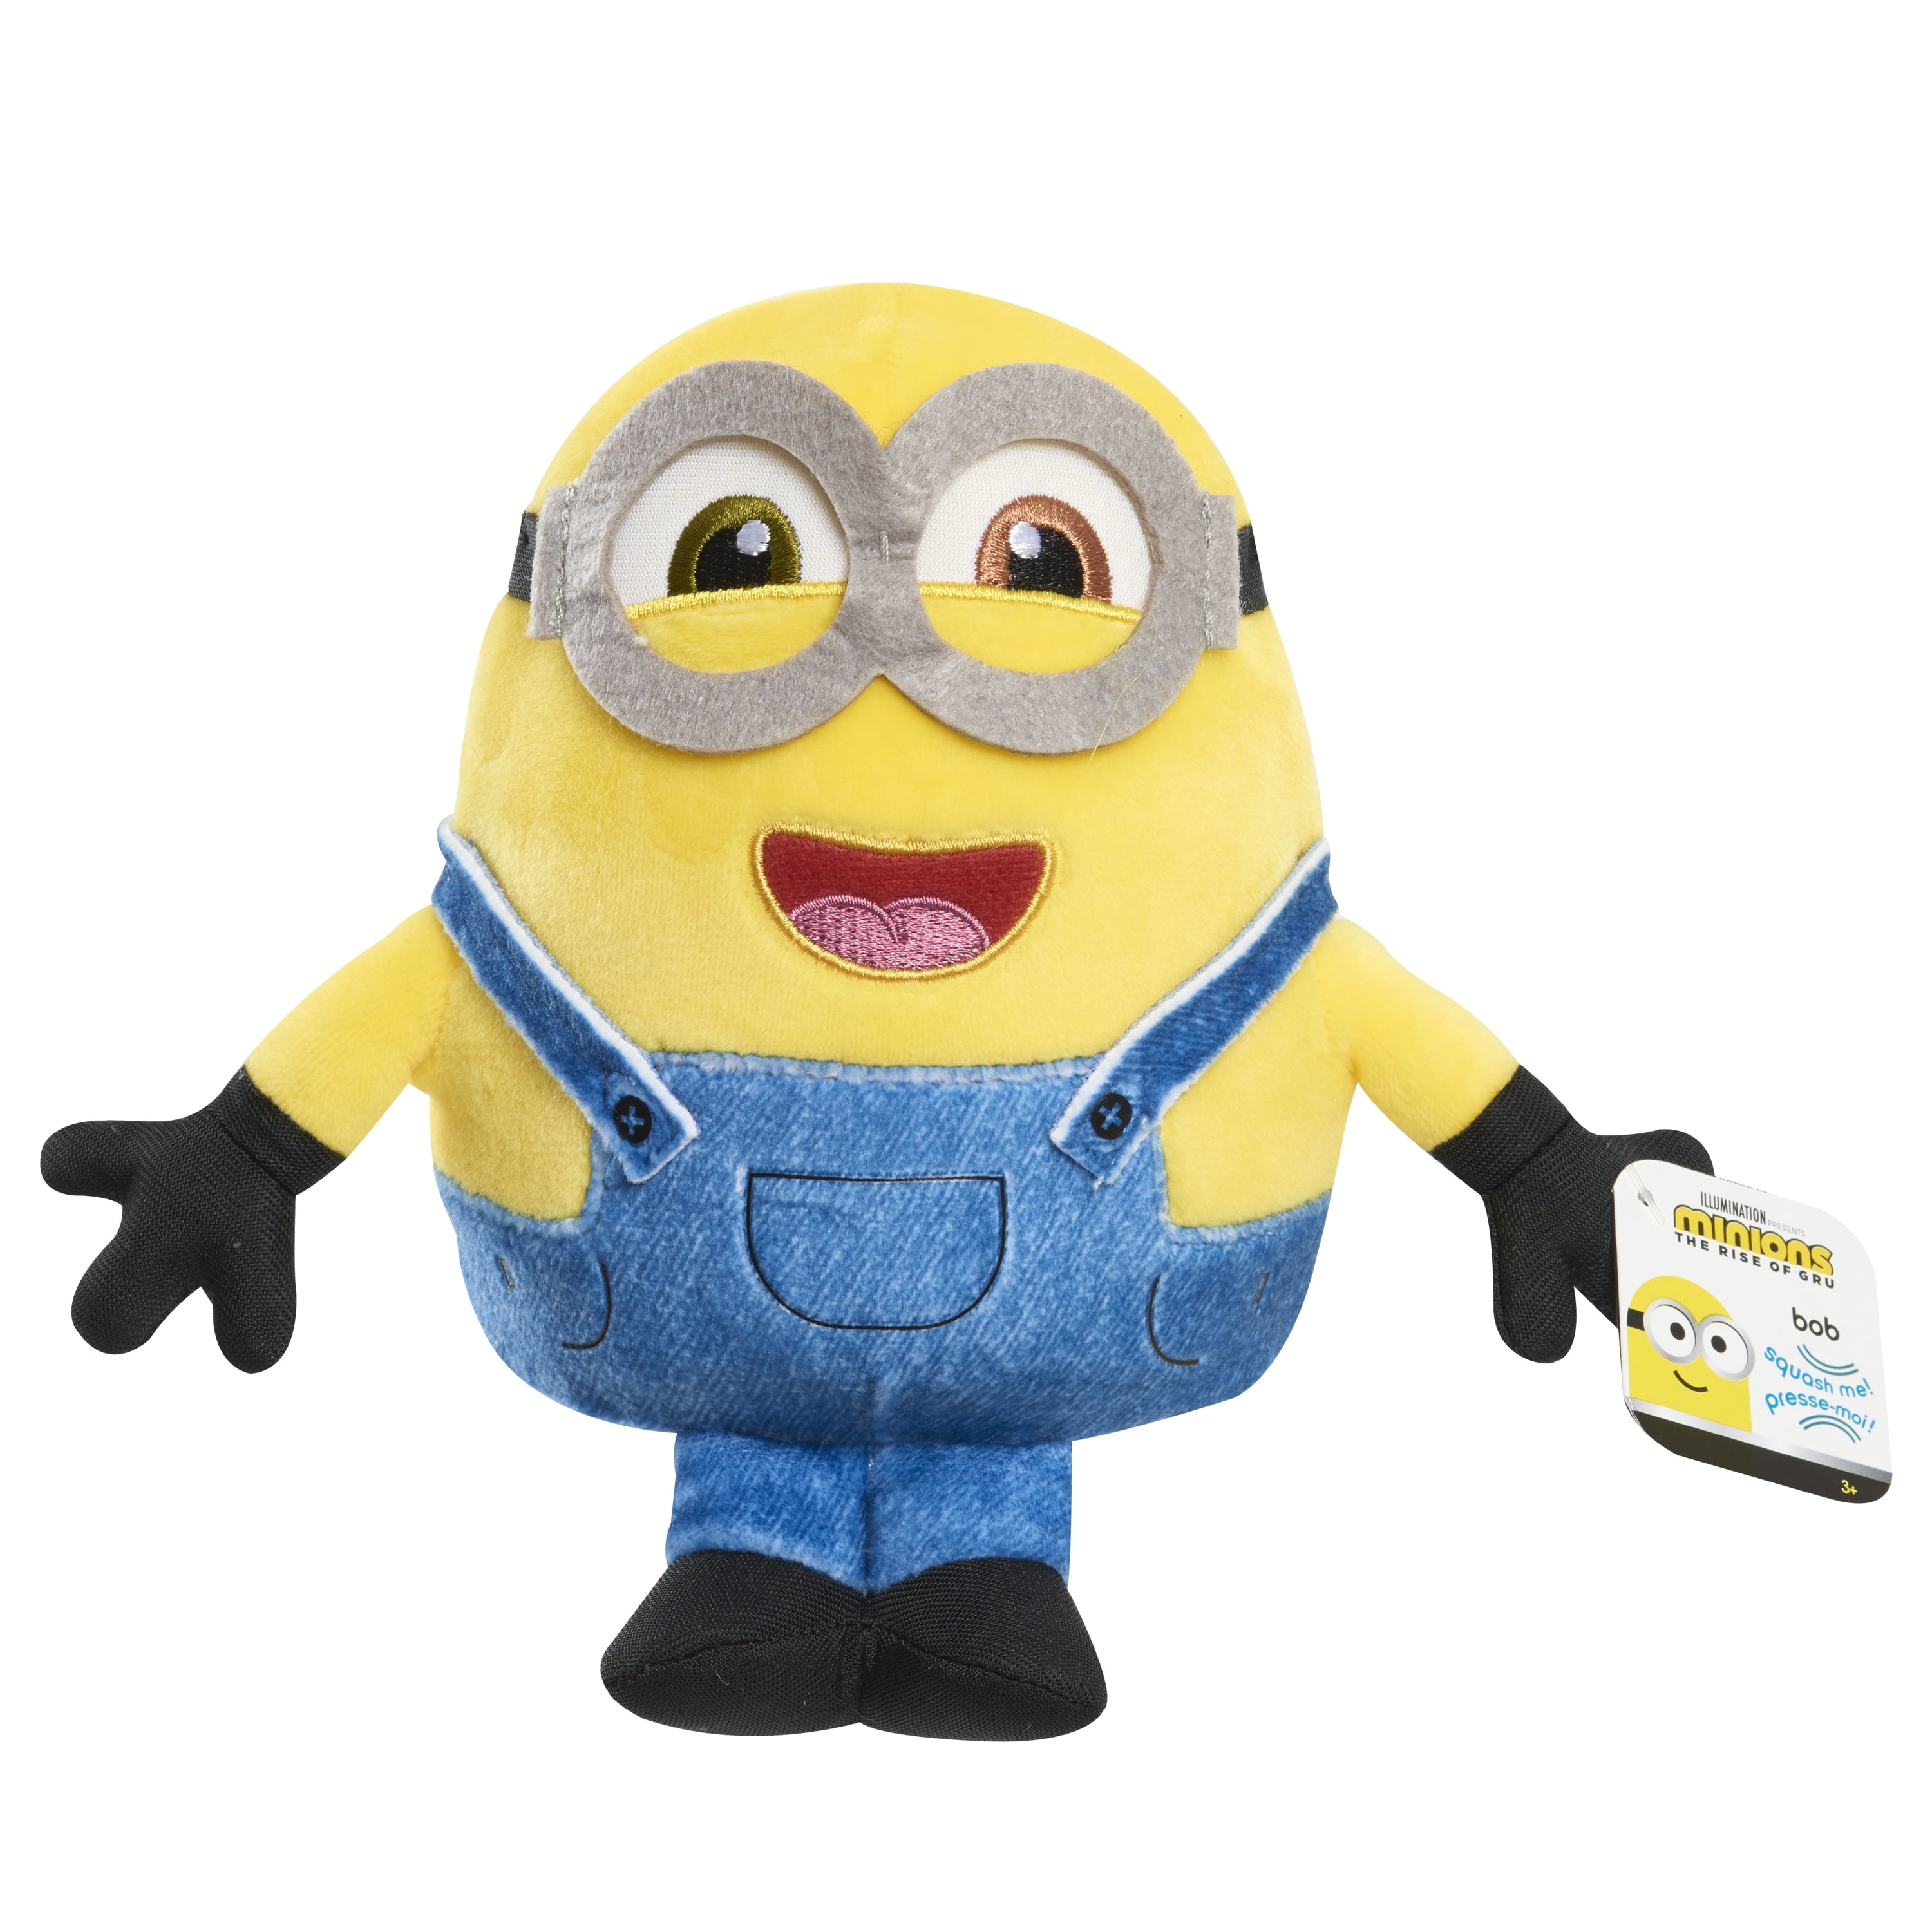 ryan's toy review minions